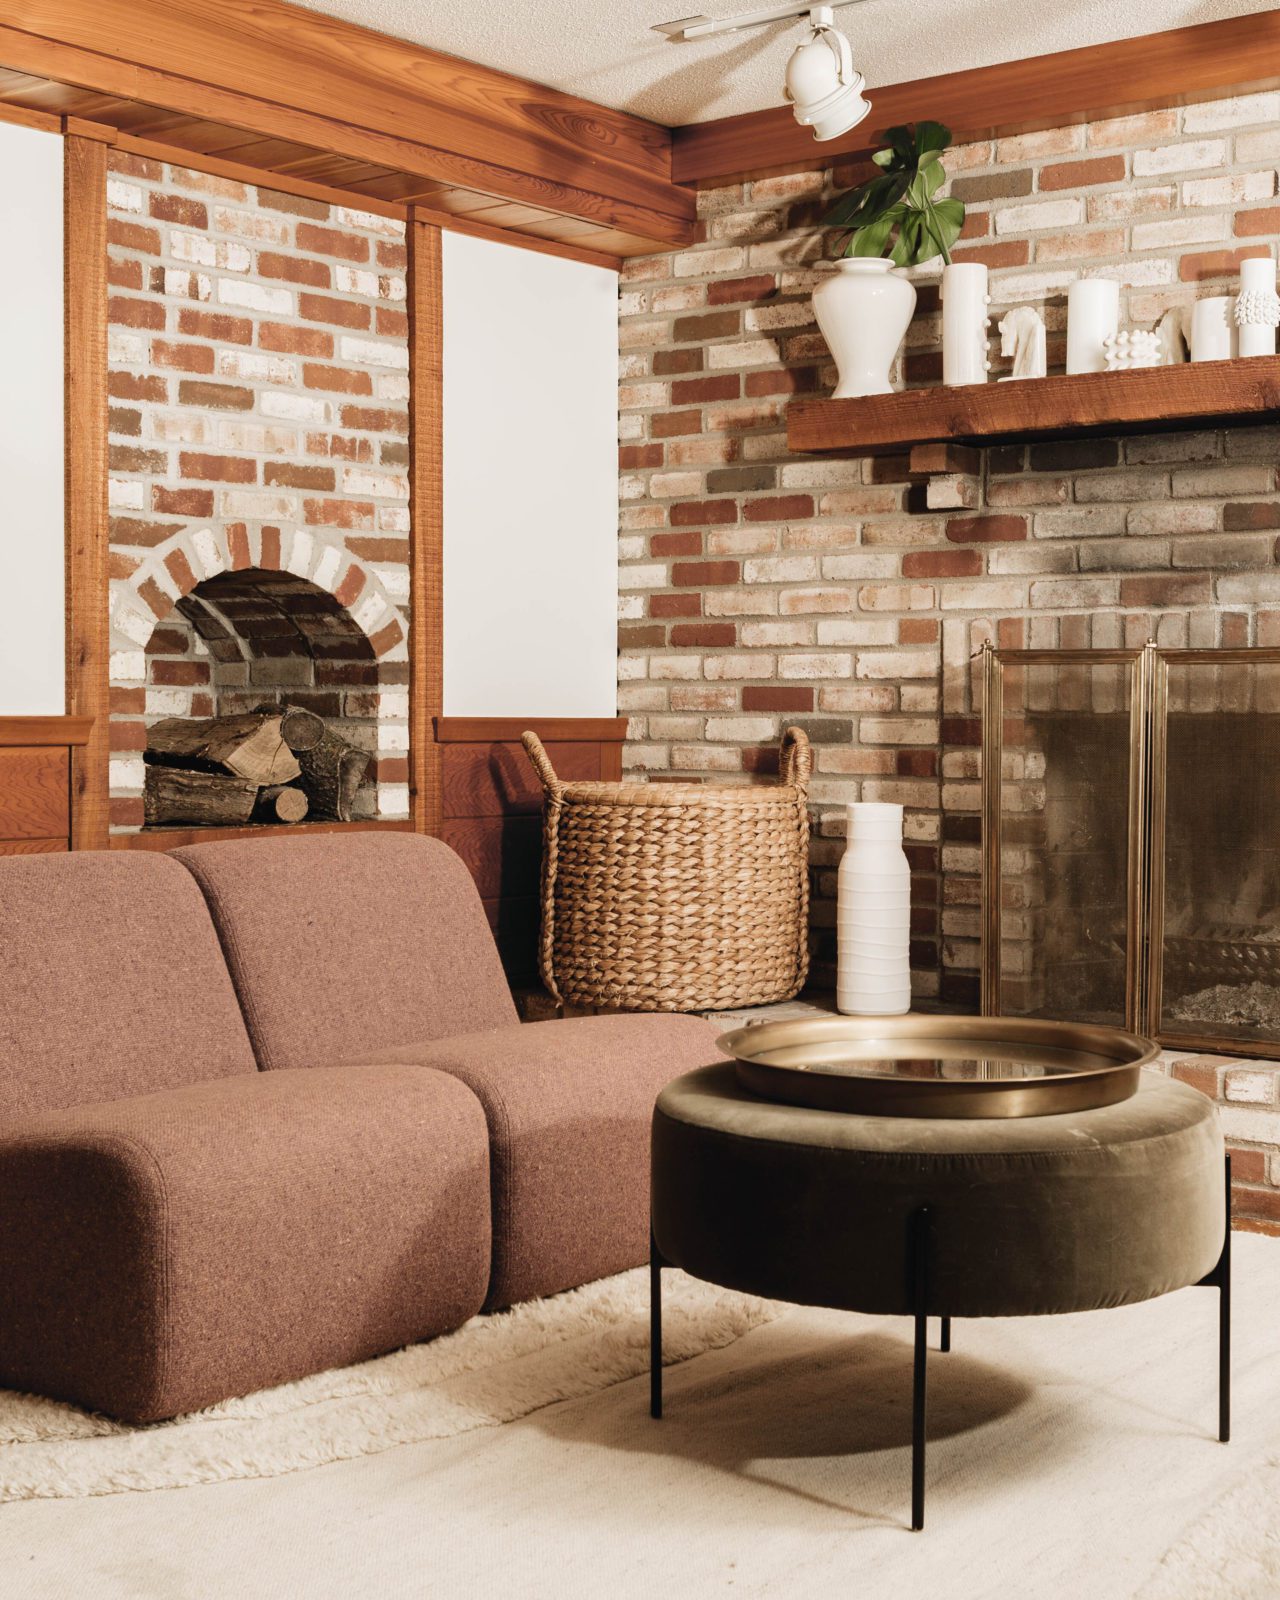 The Brick Finish I Chose for Our Basement Fireplace | Wit & Delight